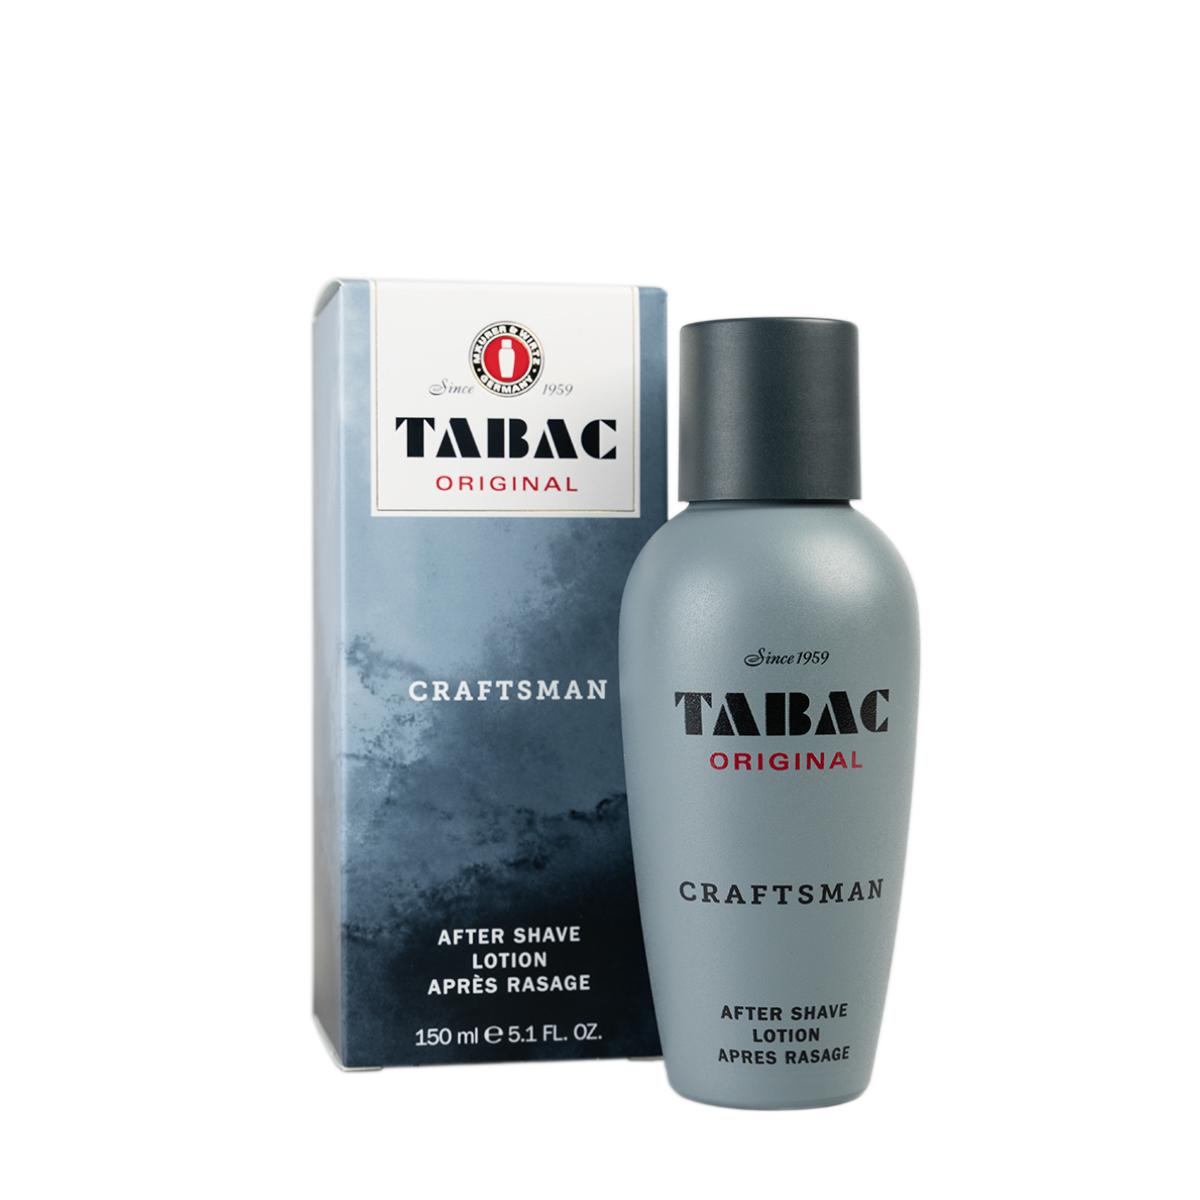 Primary image of Craftsman Aftershave Lotion